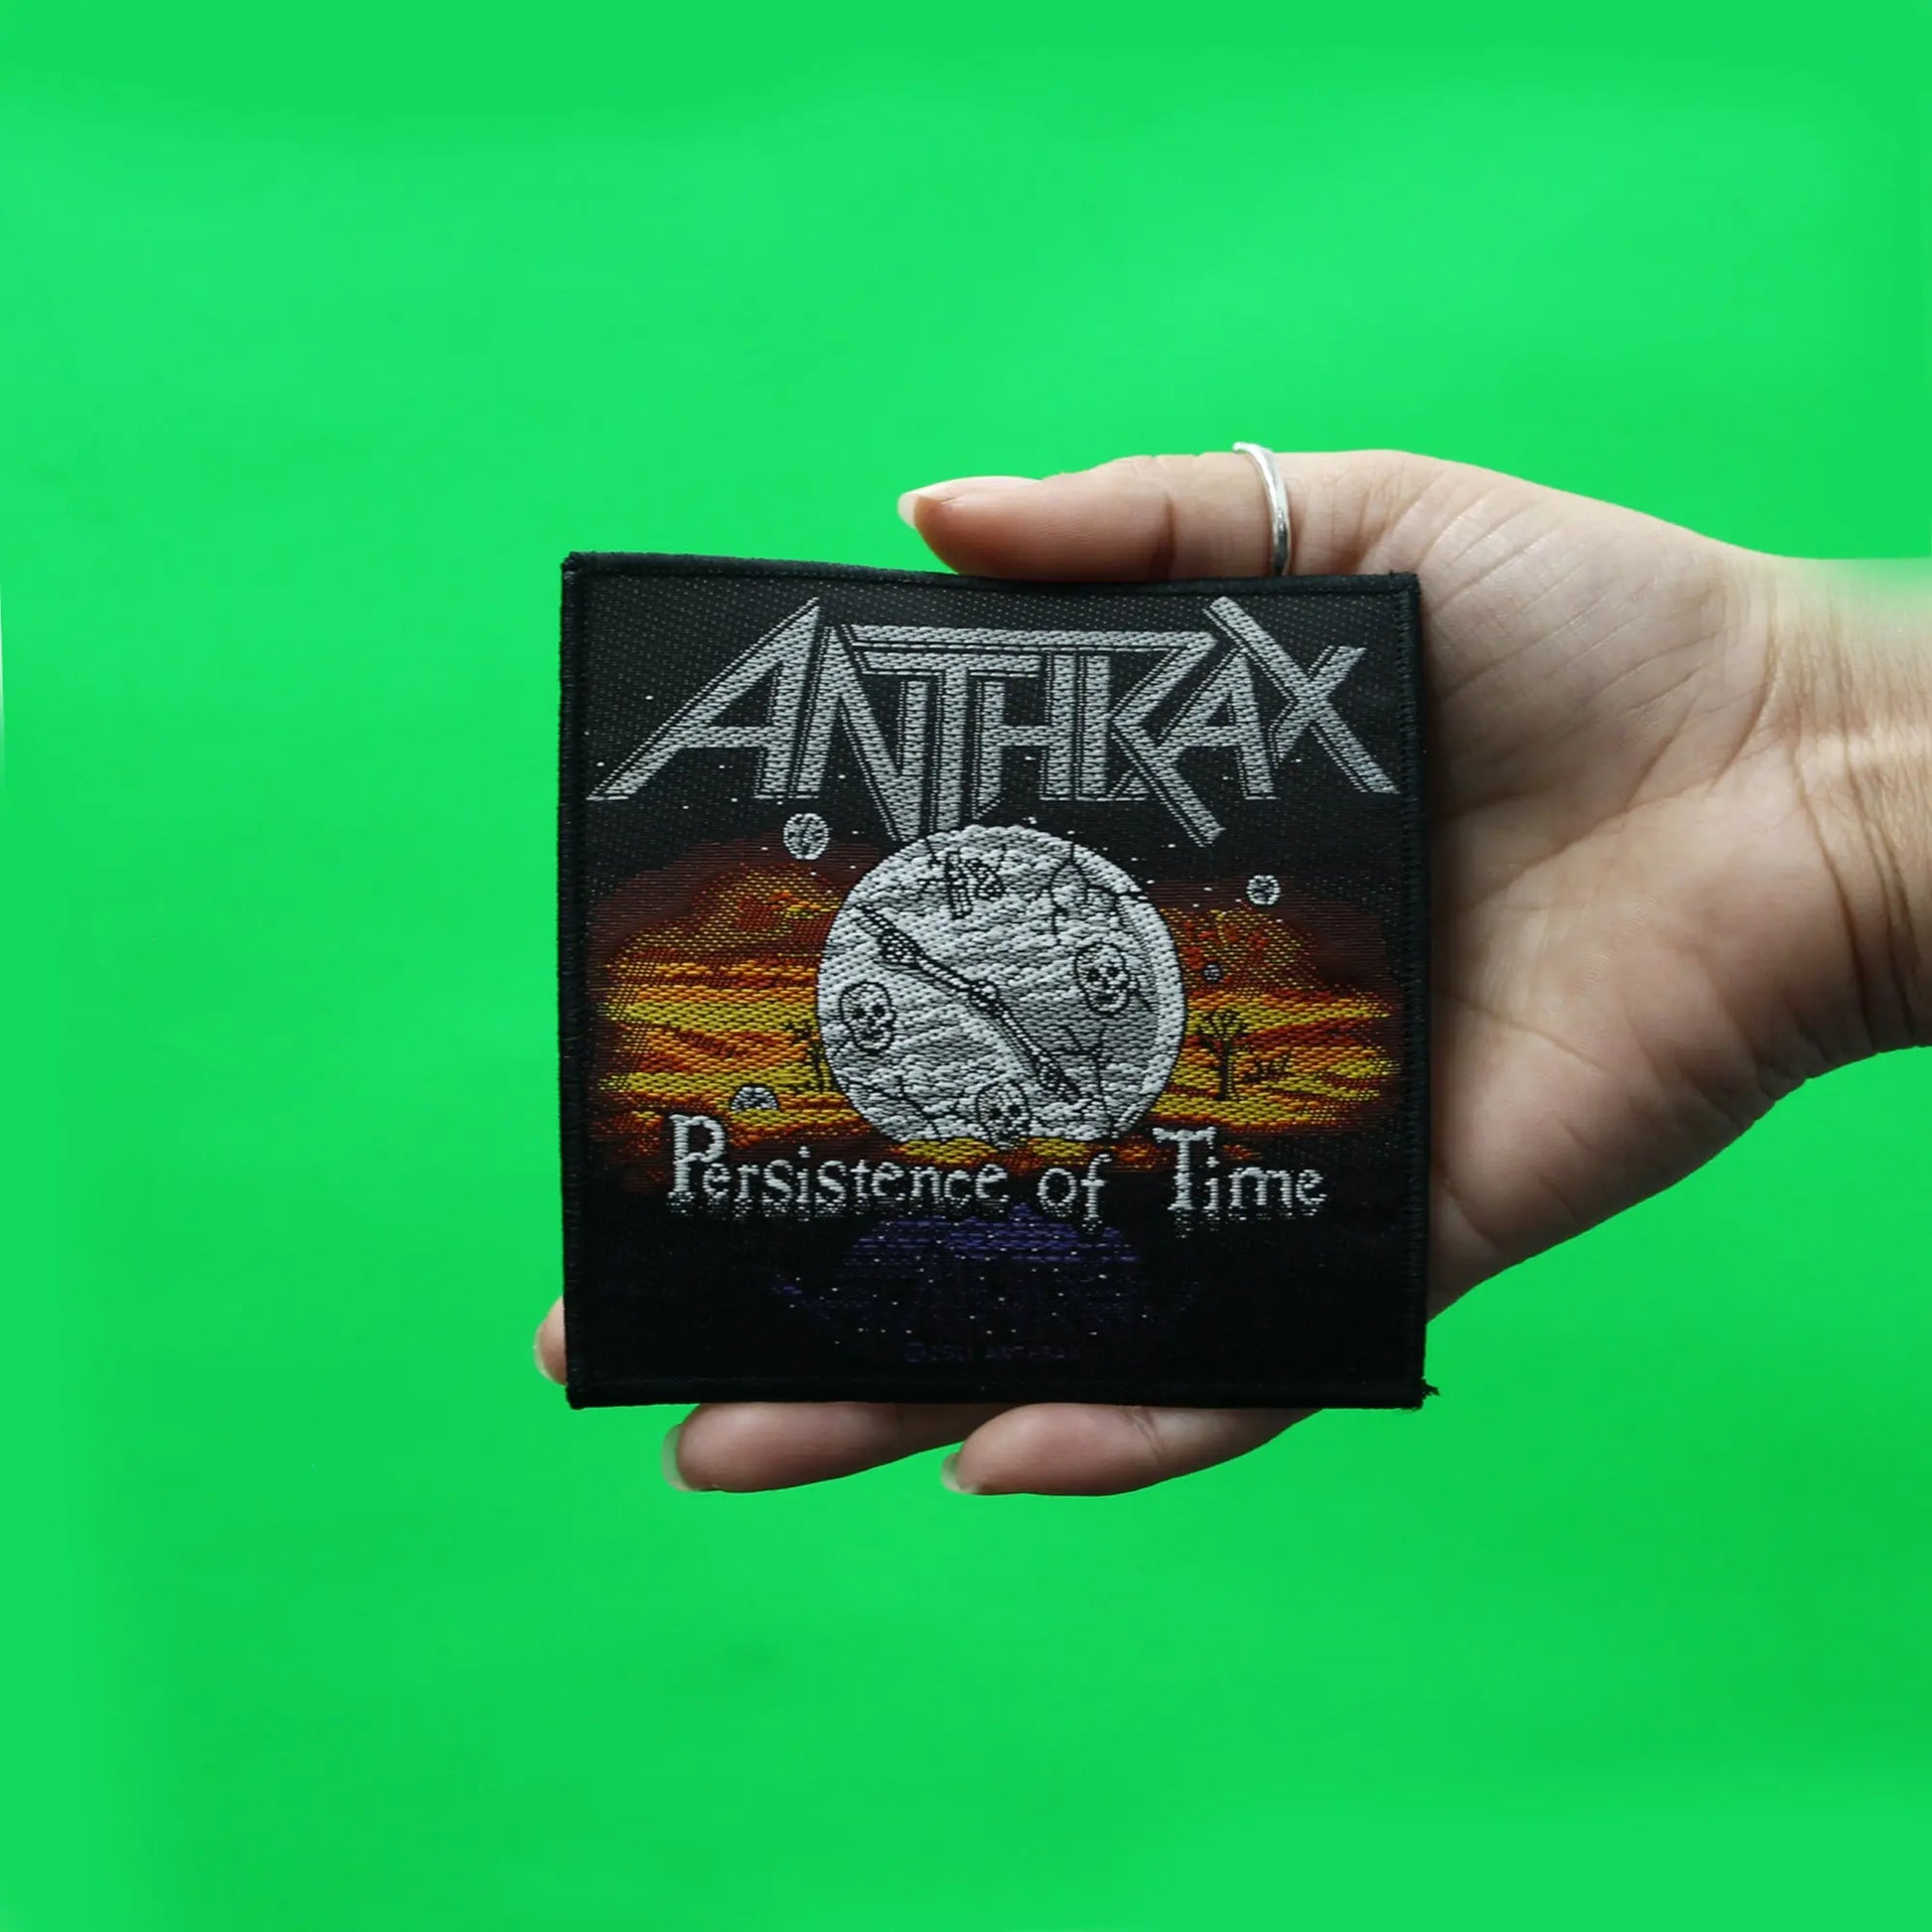 Anthrax Persistence of Time Patch 1990 Album Art Sew On 